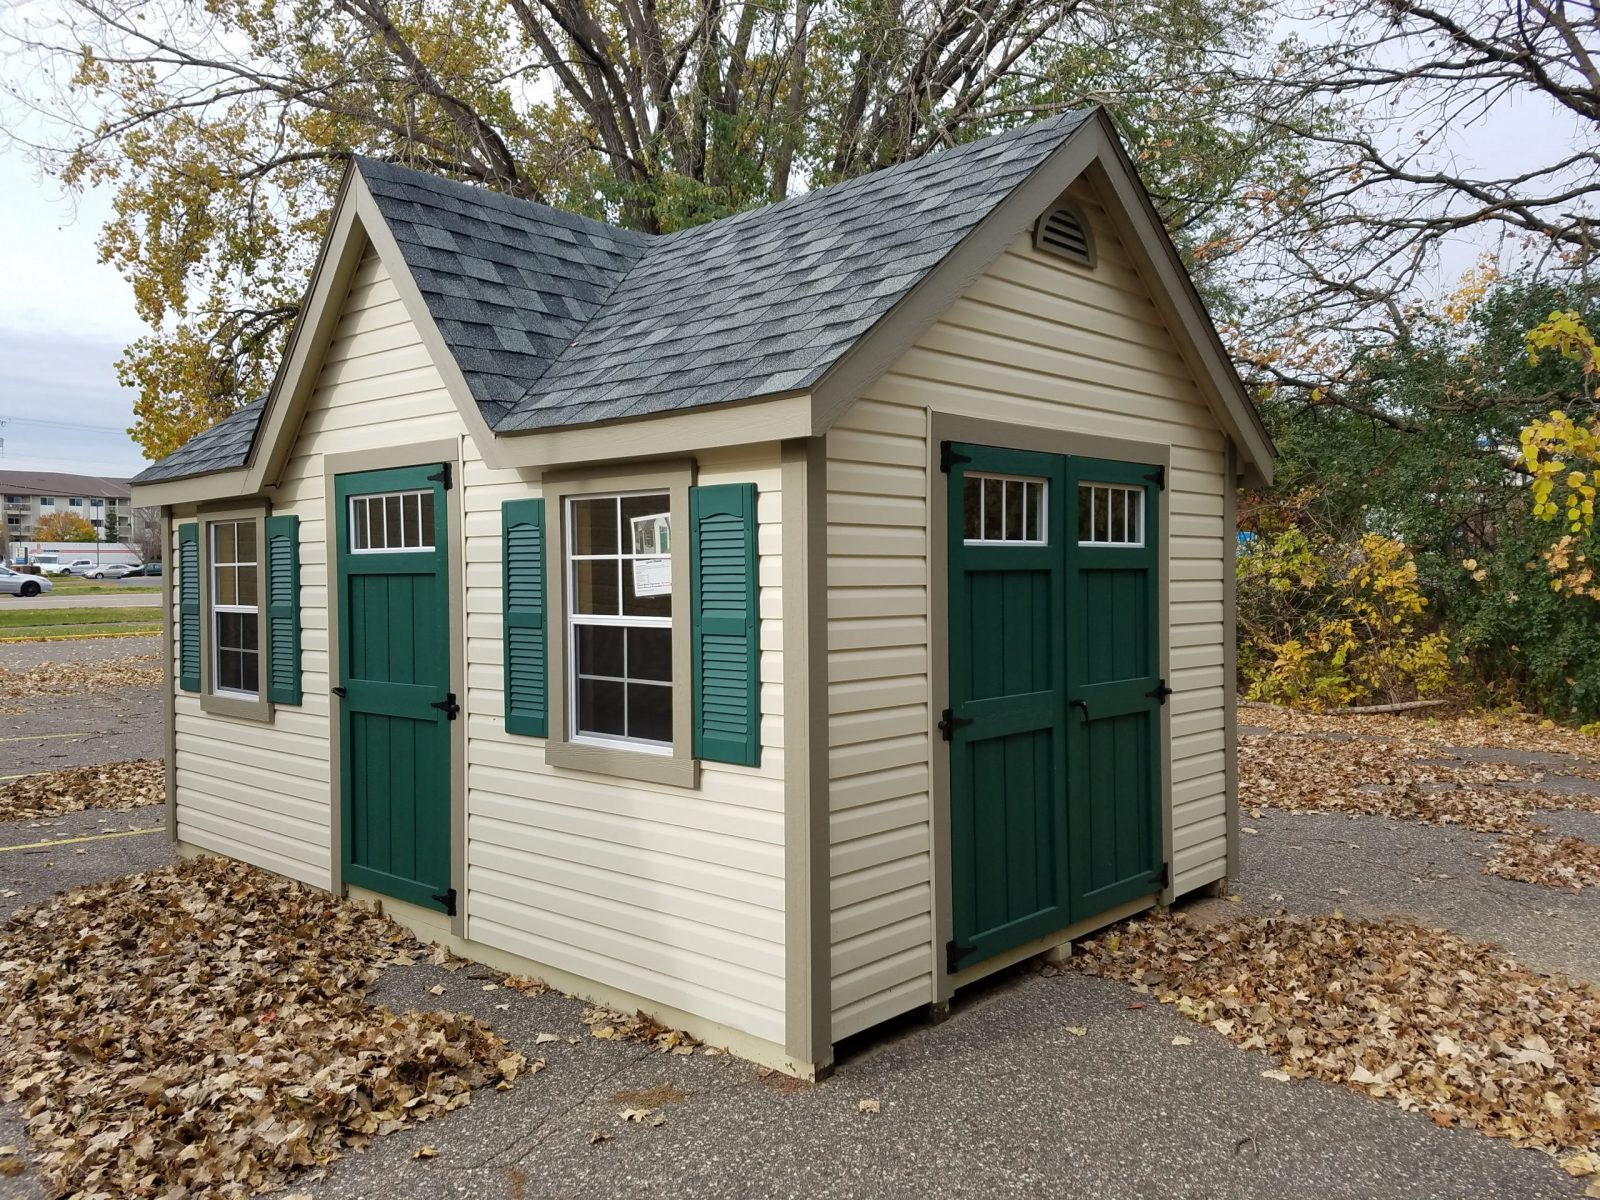 amish-made storage shed in minnesota and wisconsin 2020